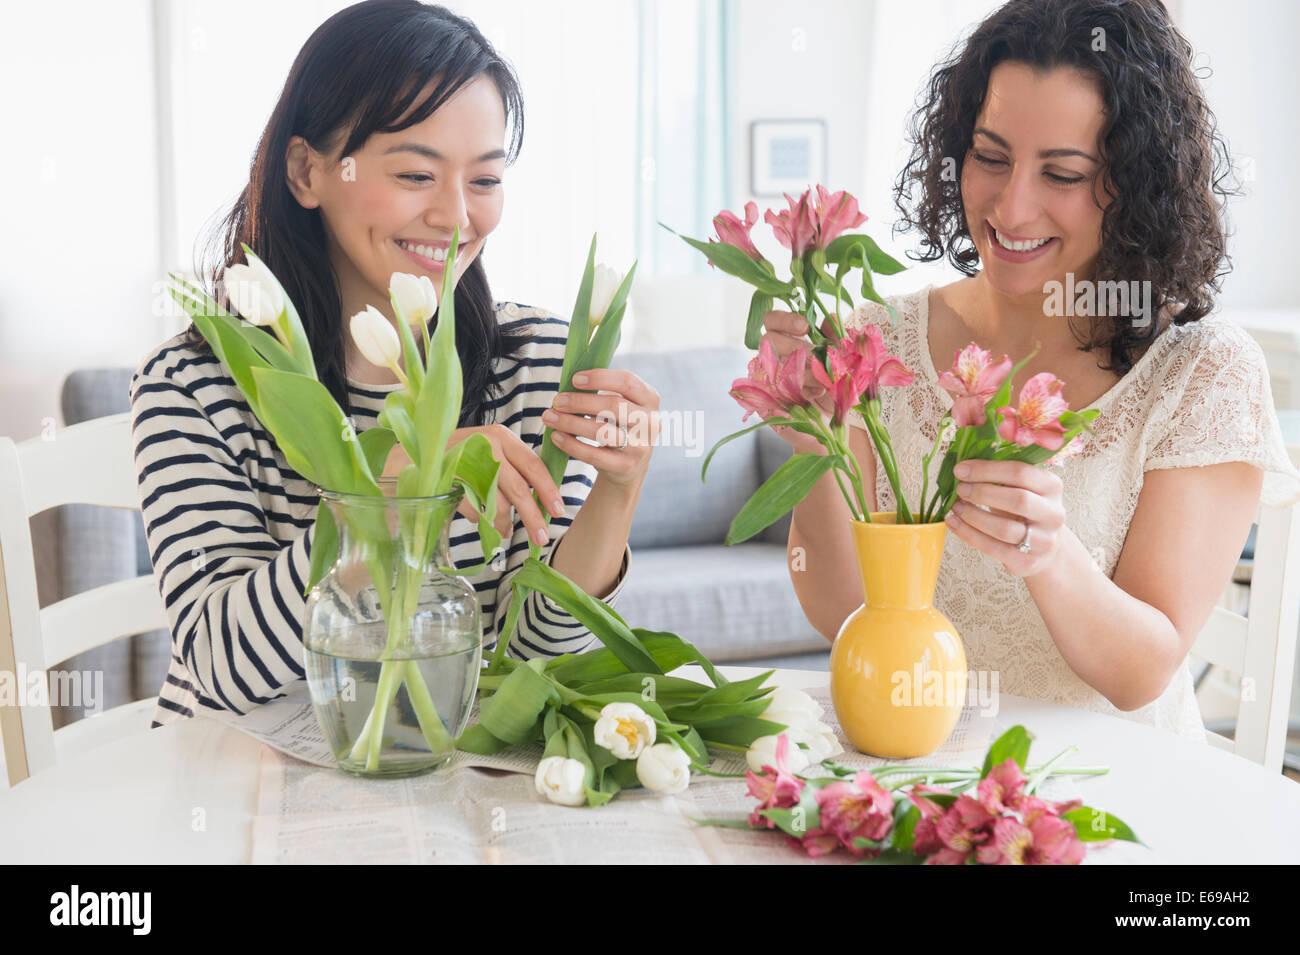 Women arranging flowers together Stock Photo